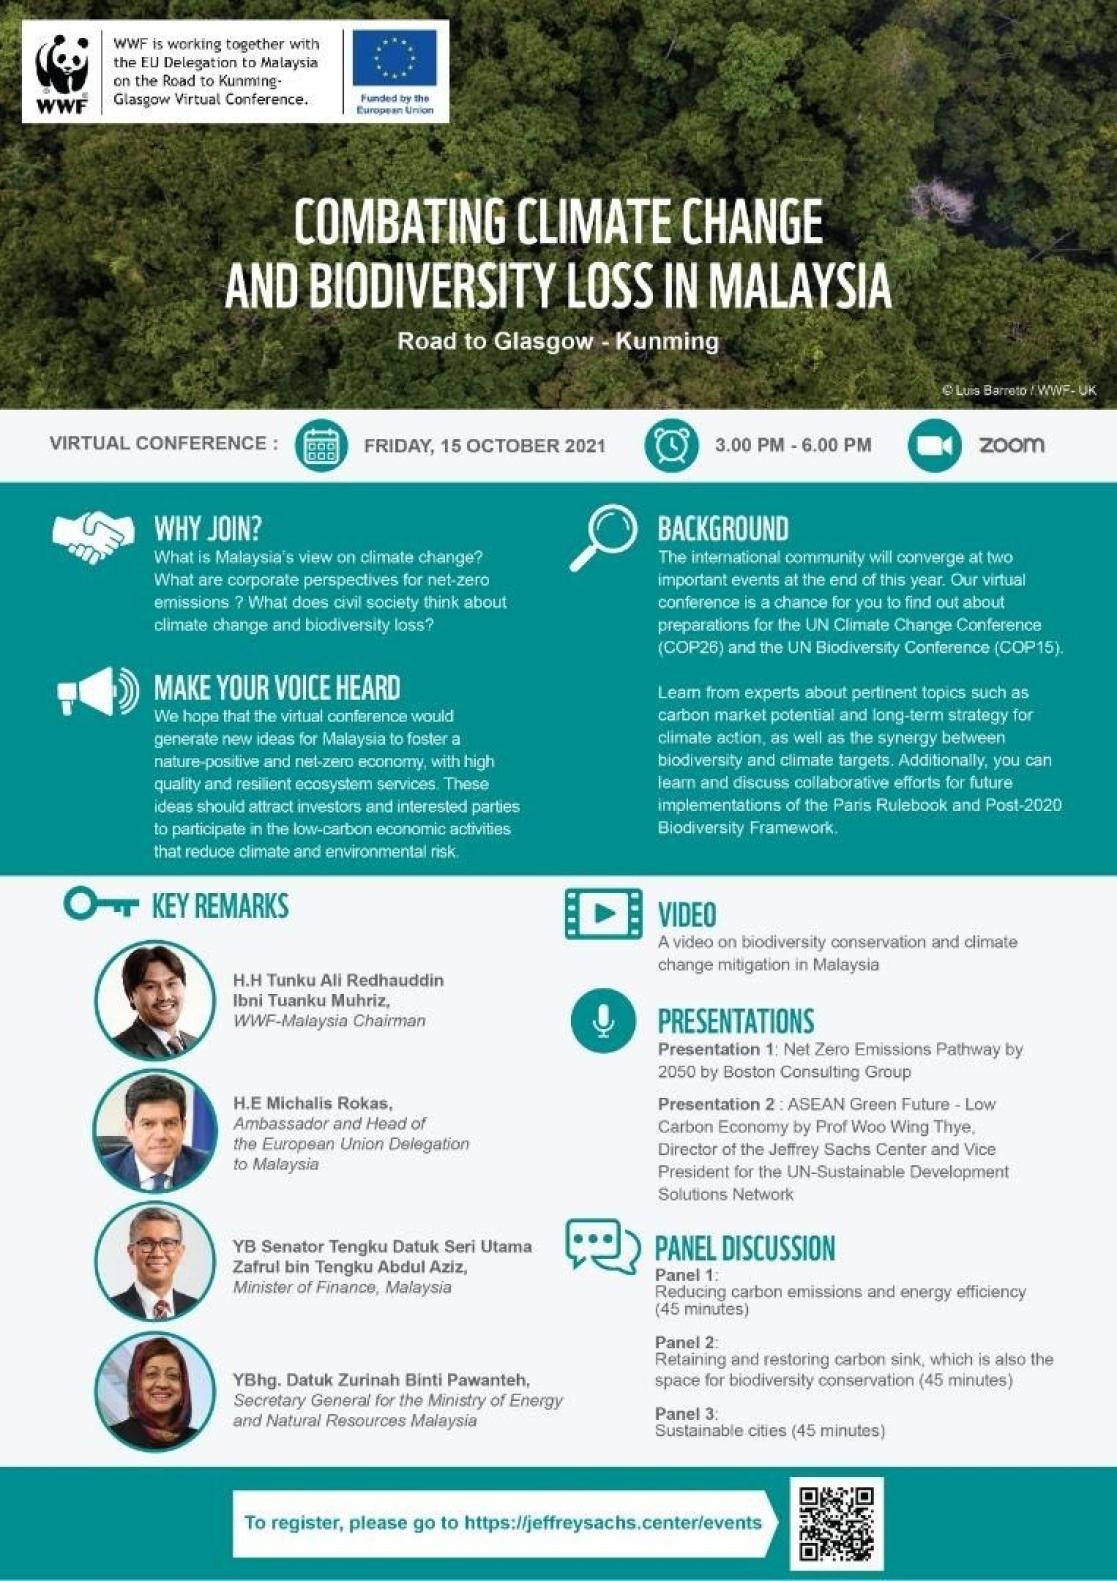 Combating climate change and biodiversity loss in Malaysia webinar agenda